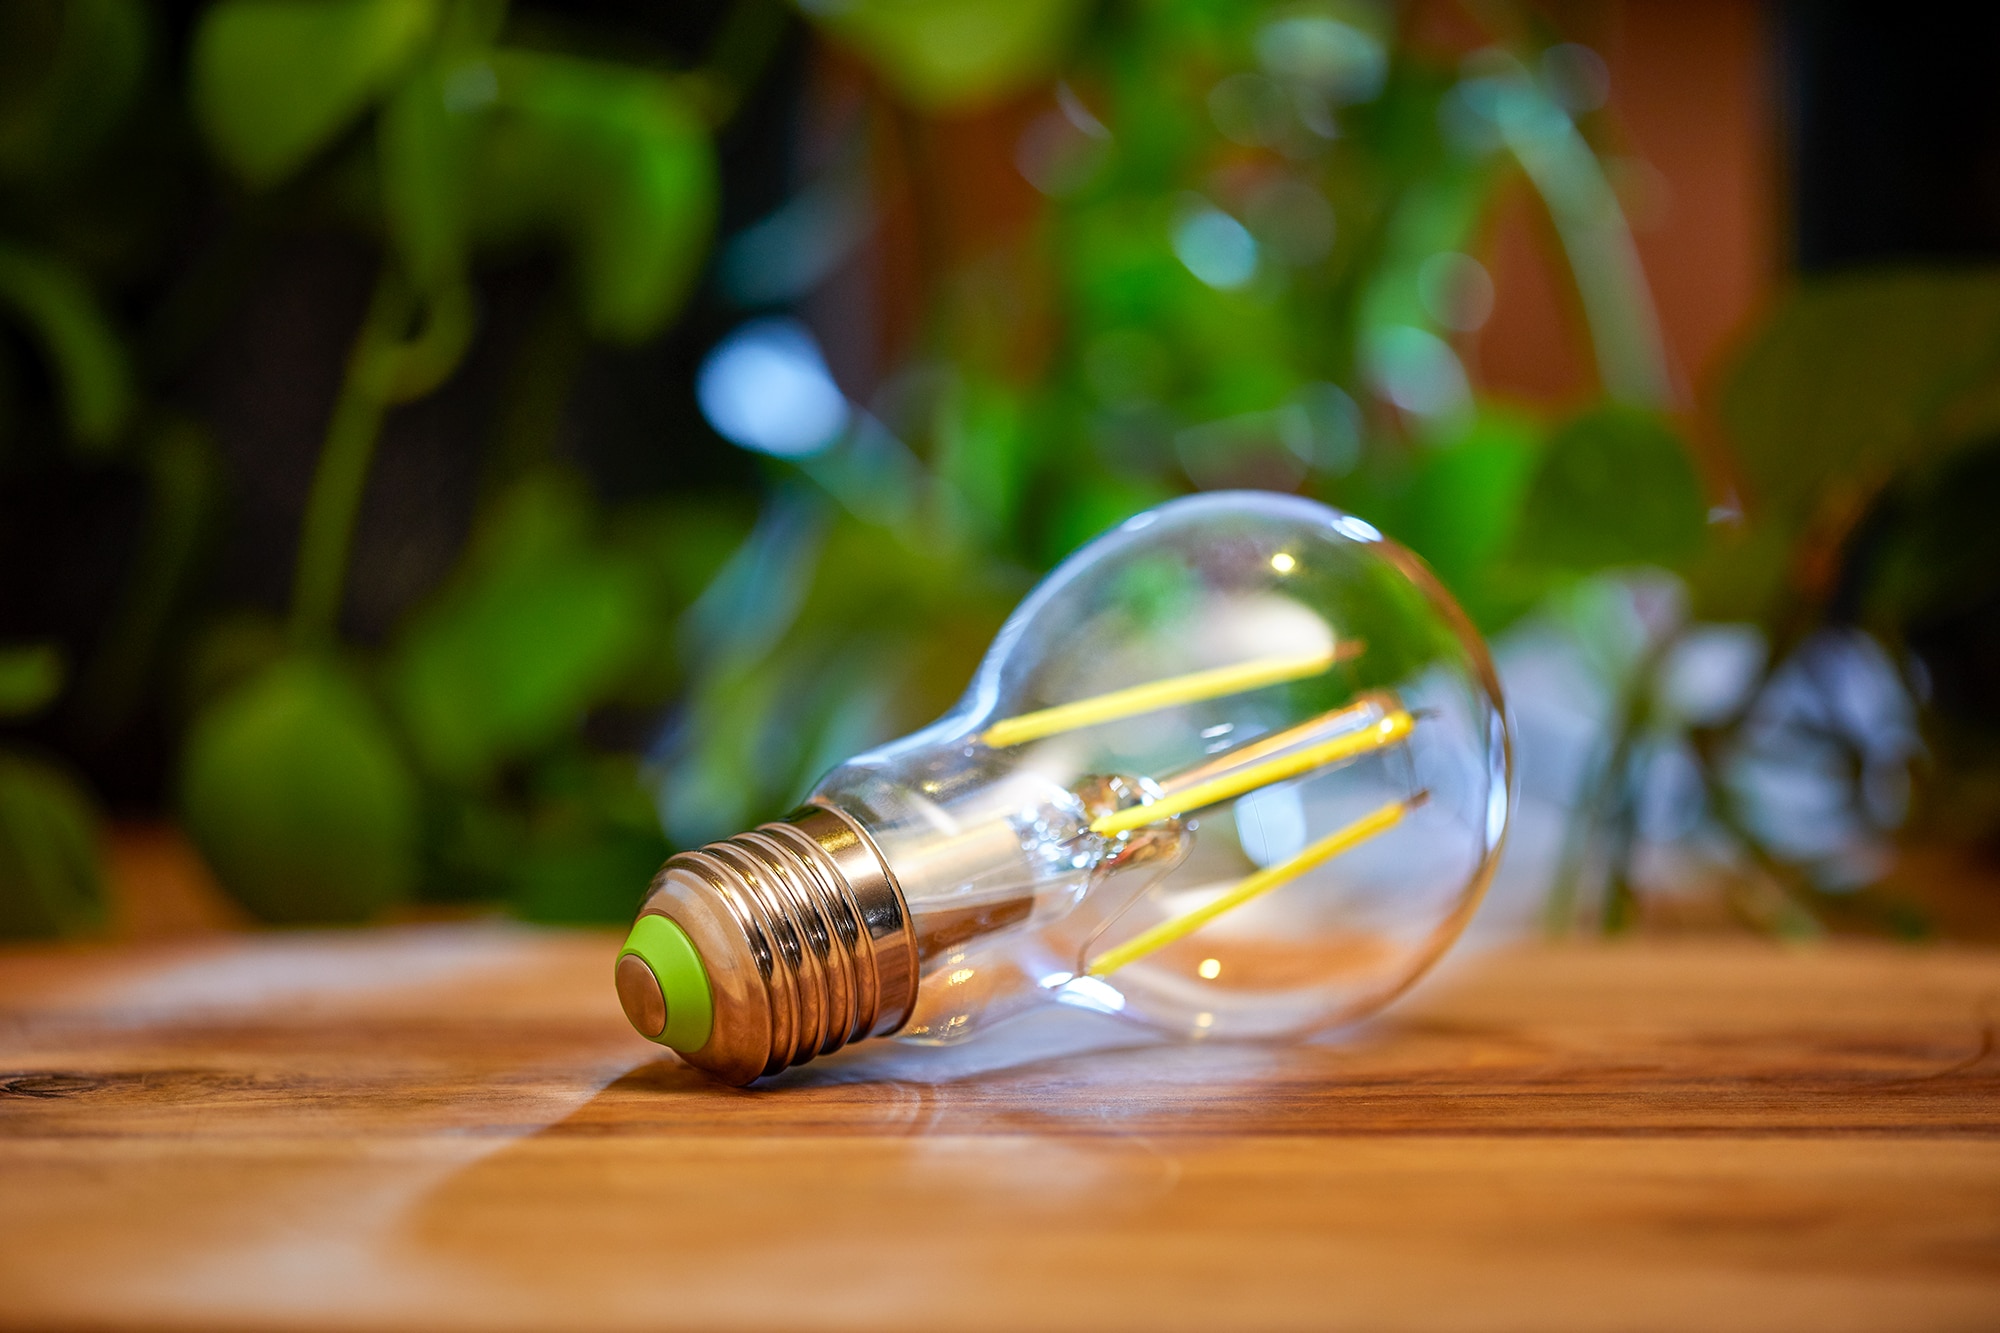 https://www.signify.com/content/dam/signify/en-aa/about/news/2021/20210830-signify-introduces-philips-leds-first-most-energy-efficient-a-class-bulbs/philips-led-classic-bulb.jpg